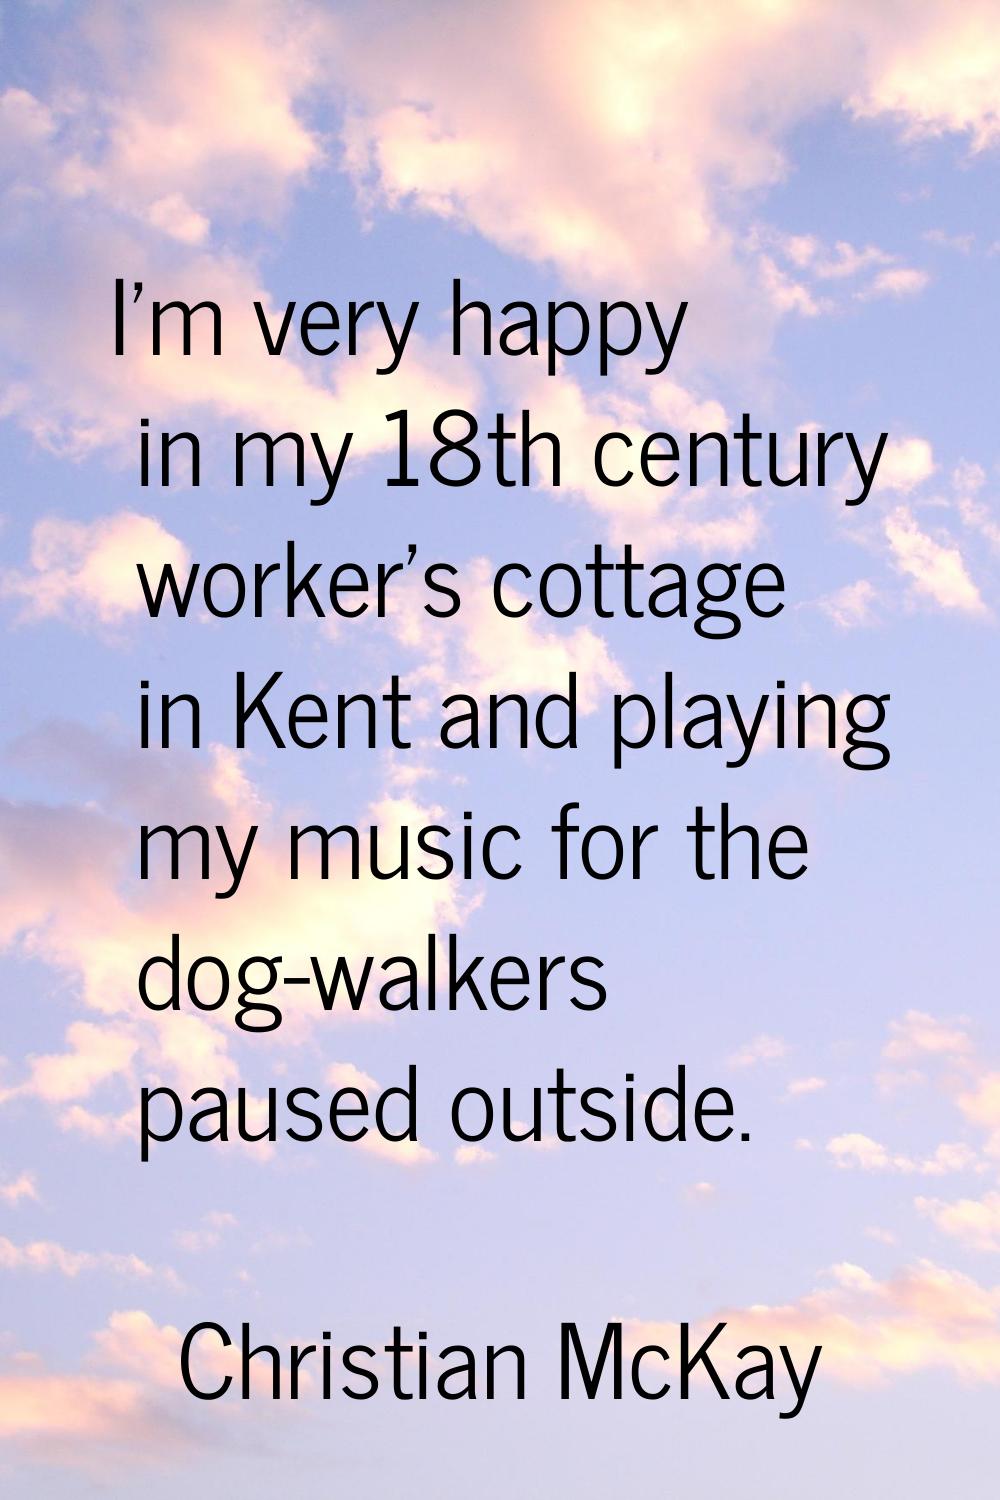 I'm very happy in my 18th century worker's cottage in Kent and playing my music for the dog-walkers